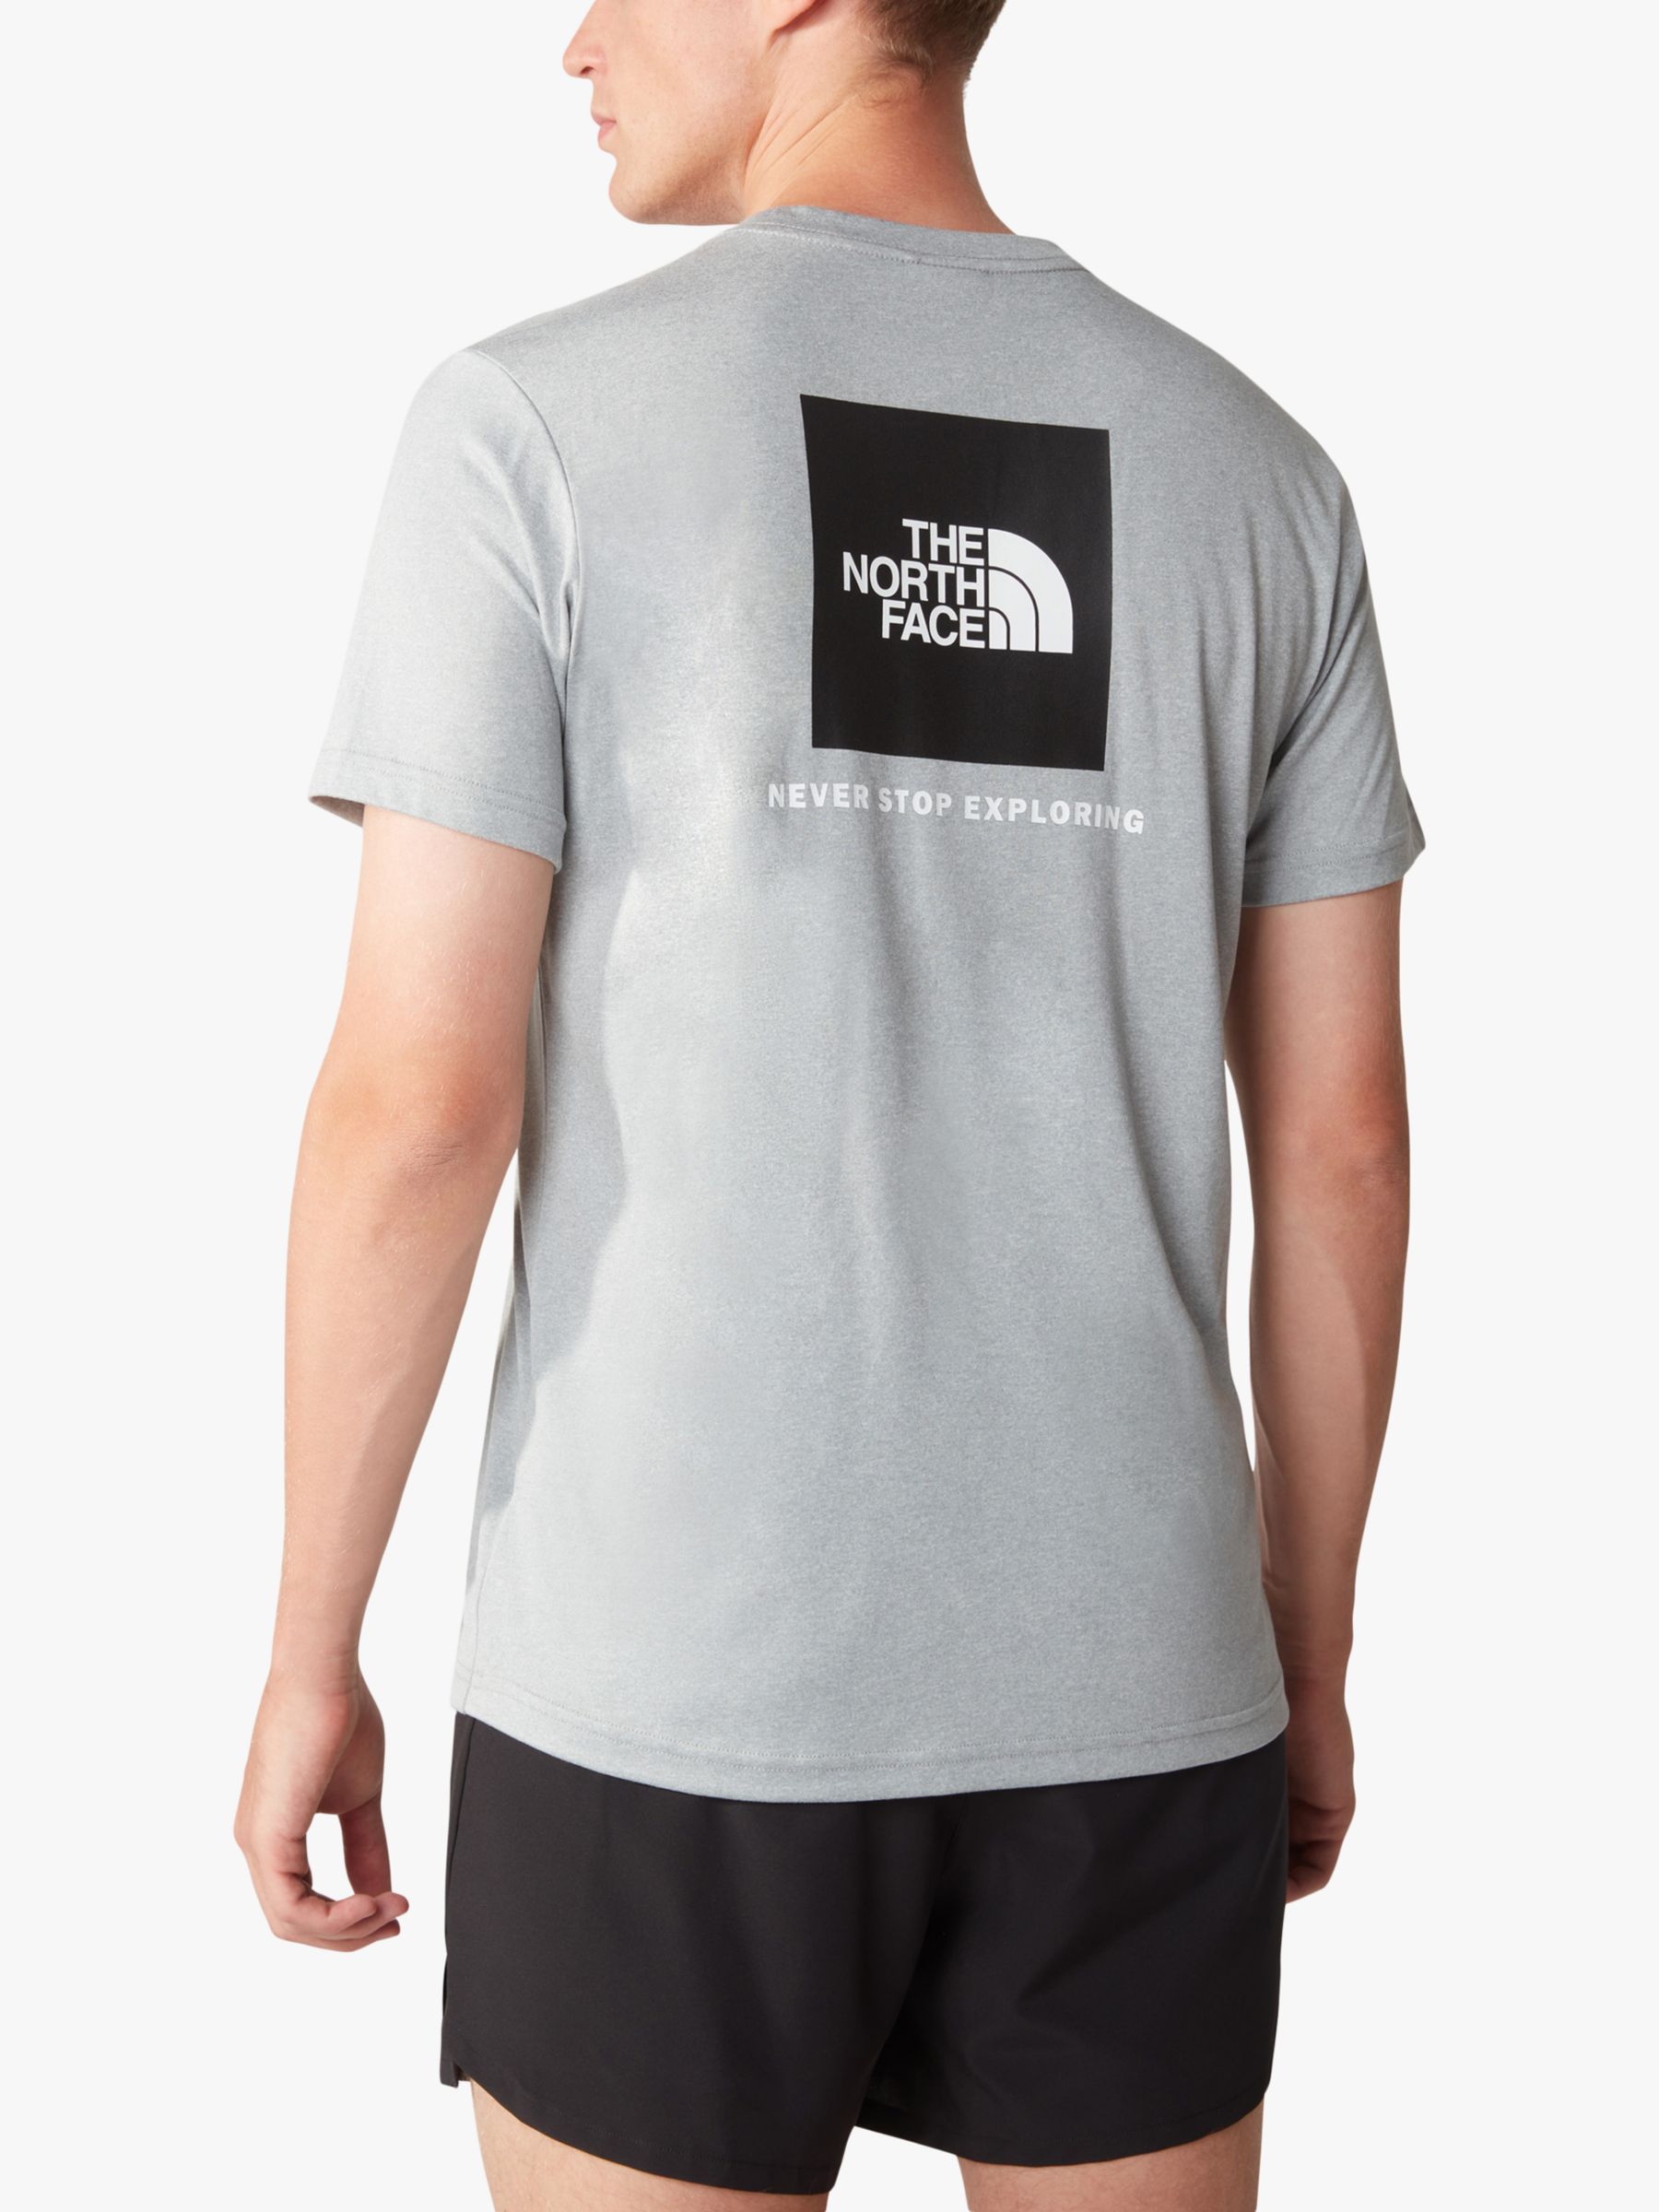 The North Face Reaxion Redbox T-Shirt, Grey Heather, S